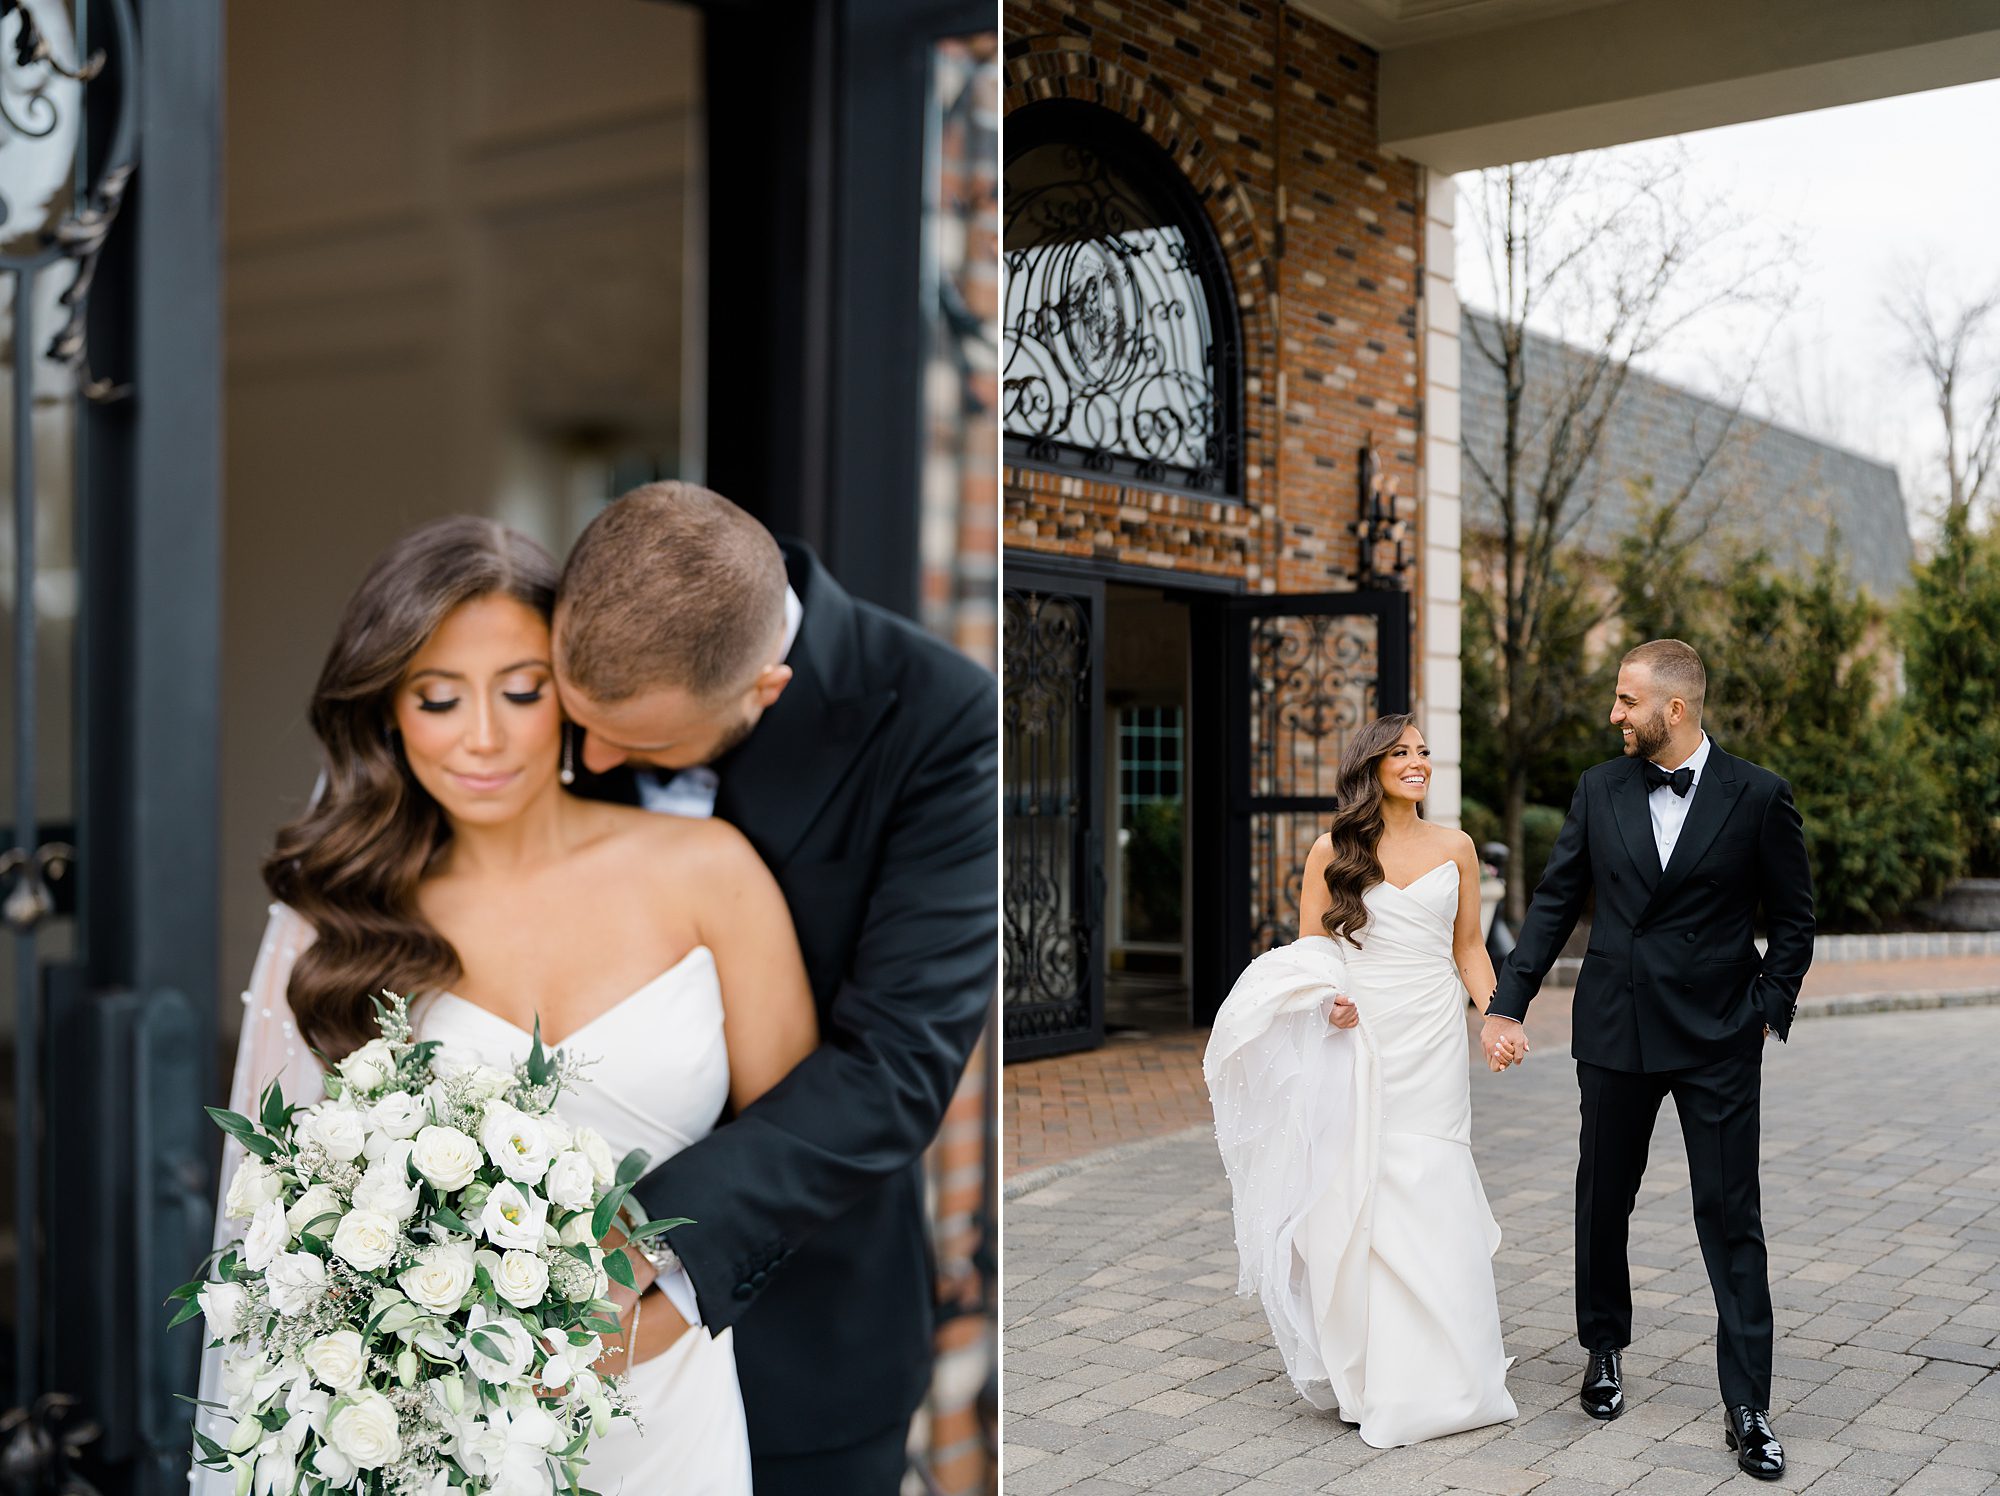 wedding portraits from New Jersey wedding photographed by Amber Dawn Photography